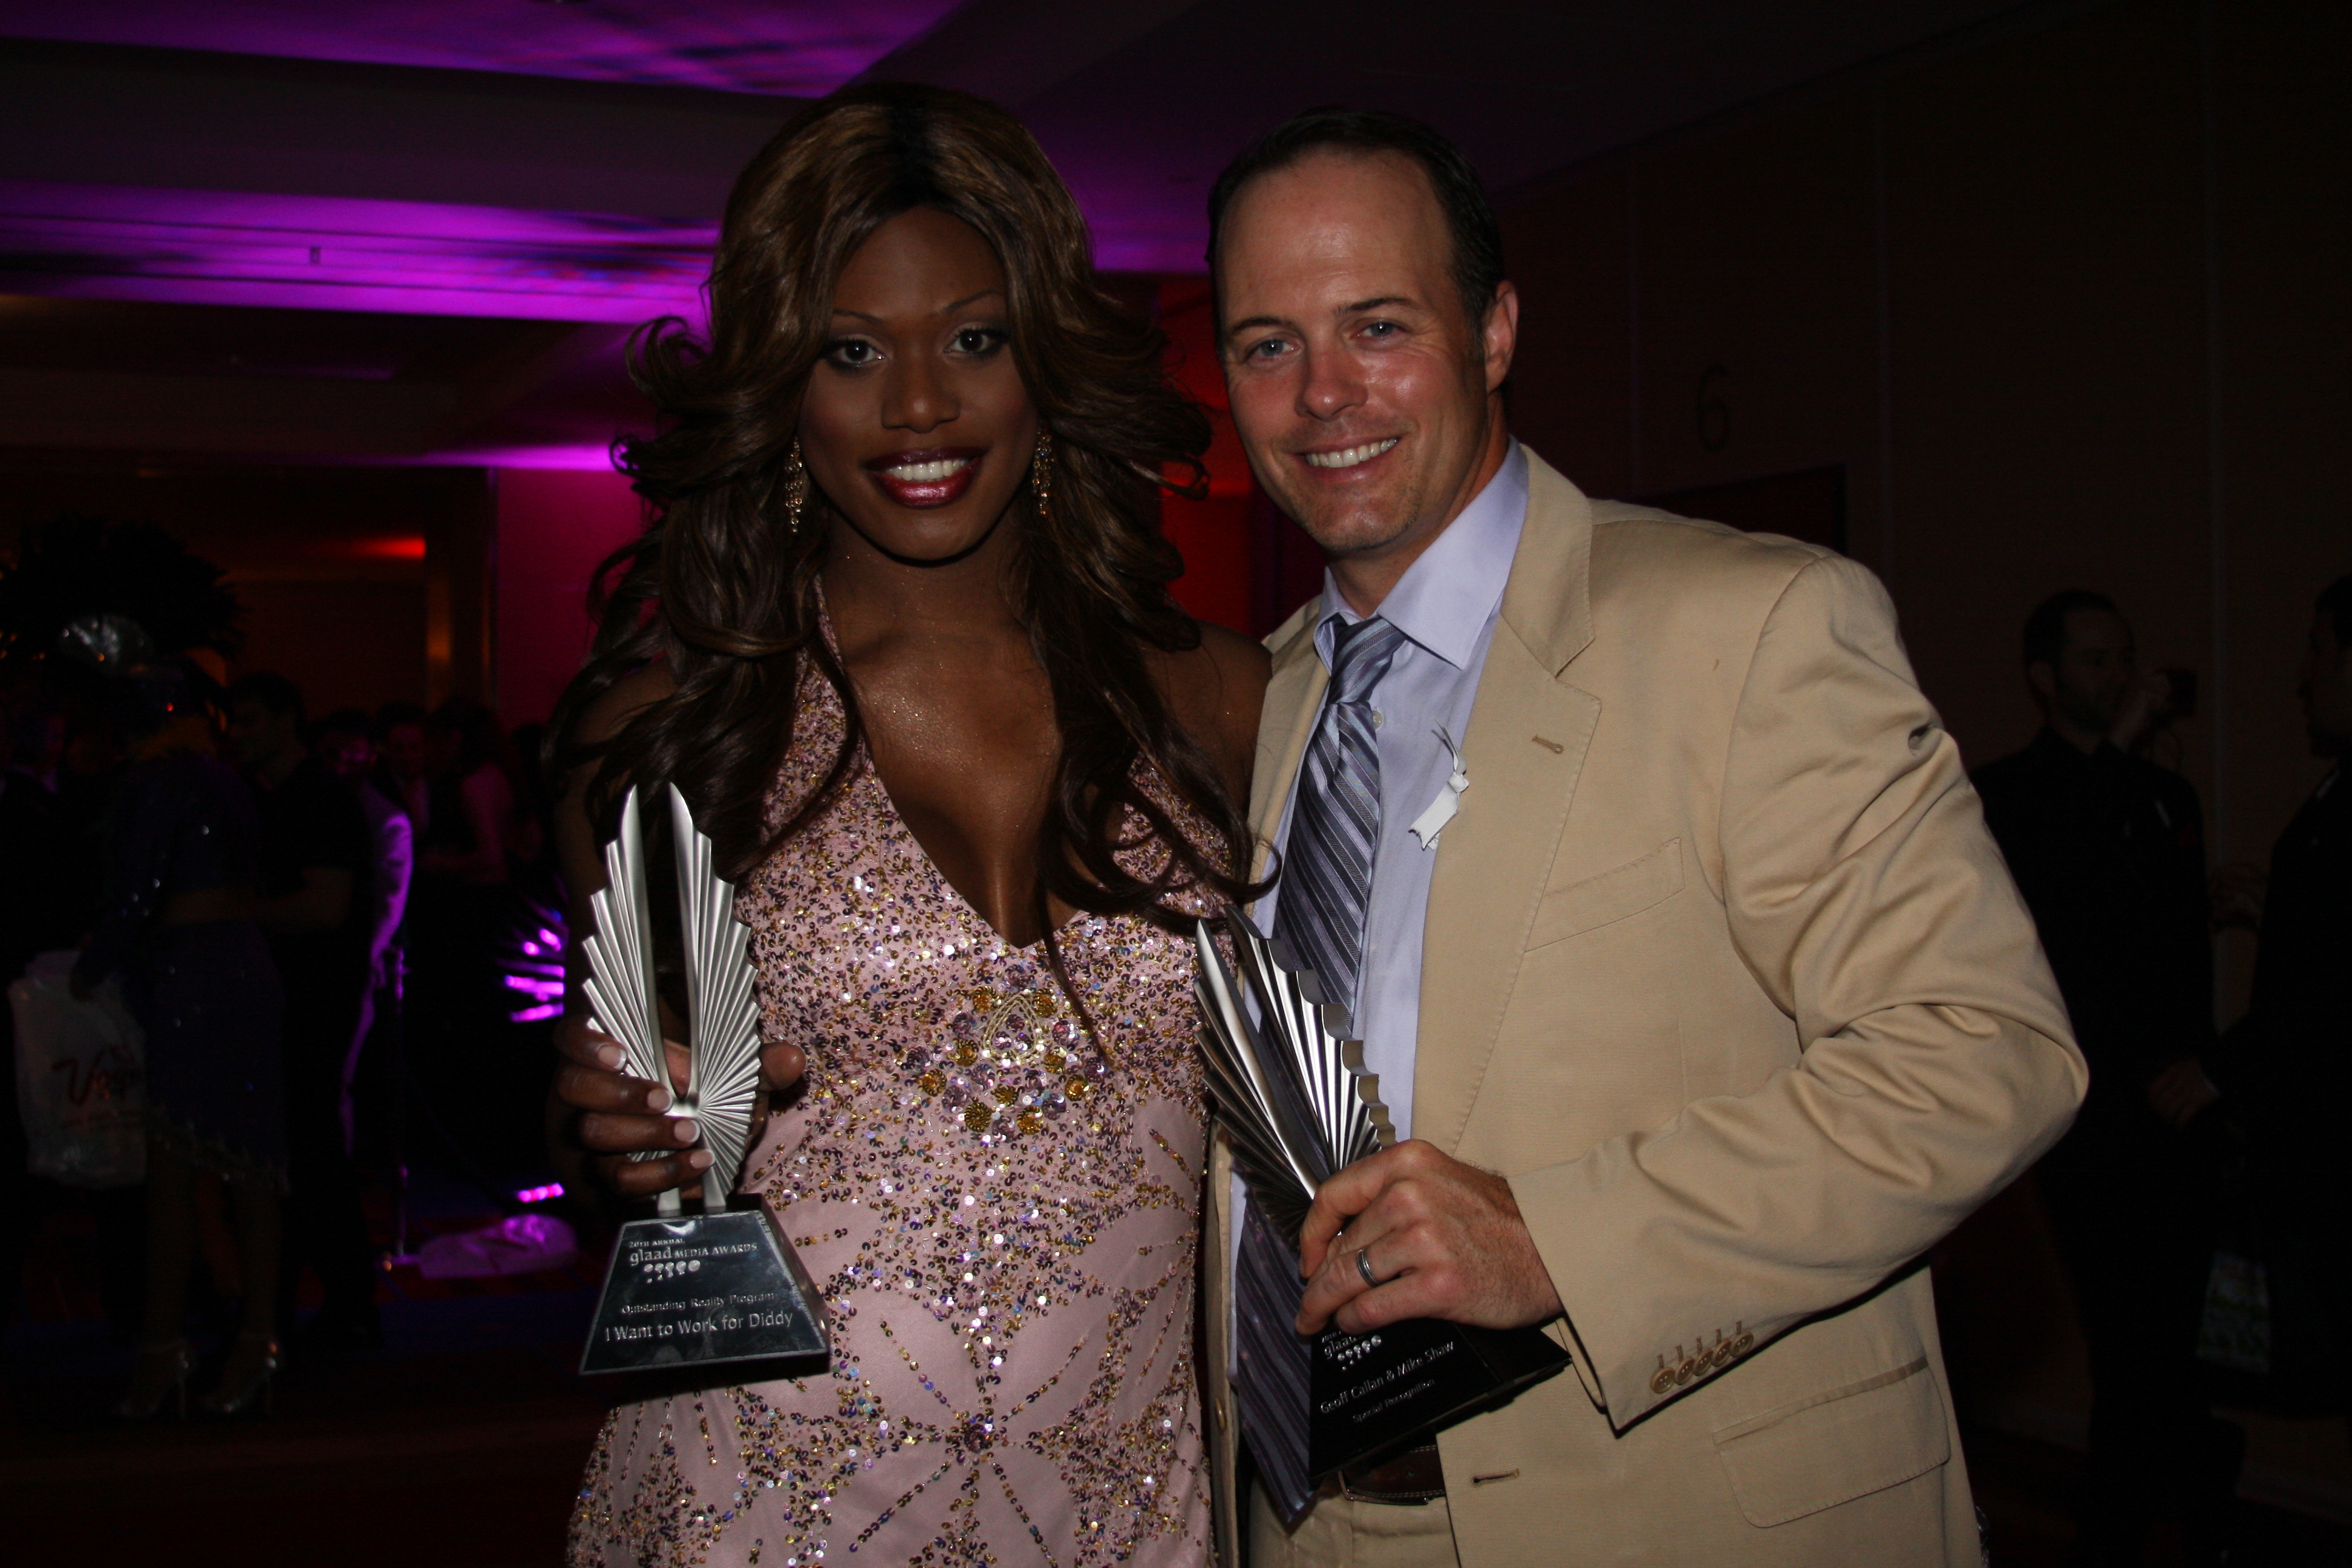 Laverne Cox and Geoff Callan at the 20th Annual GLAAD Media Awards